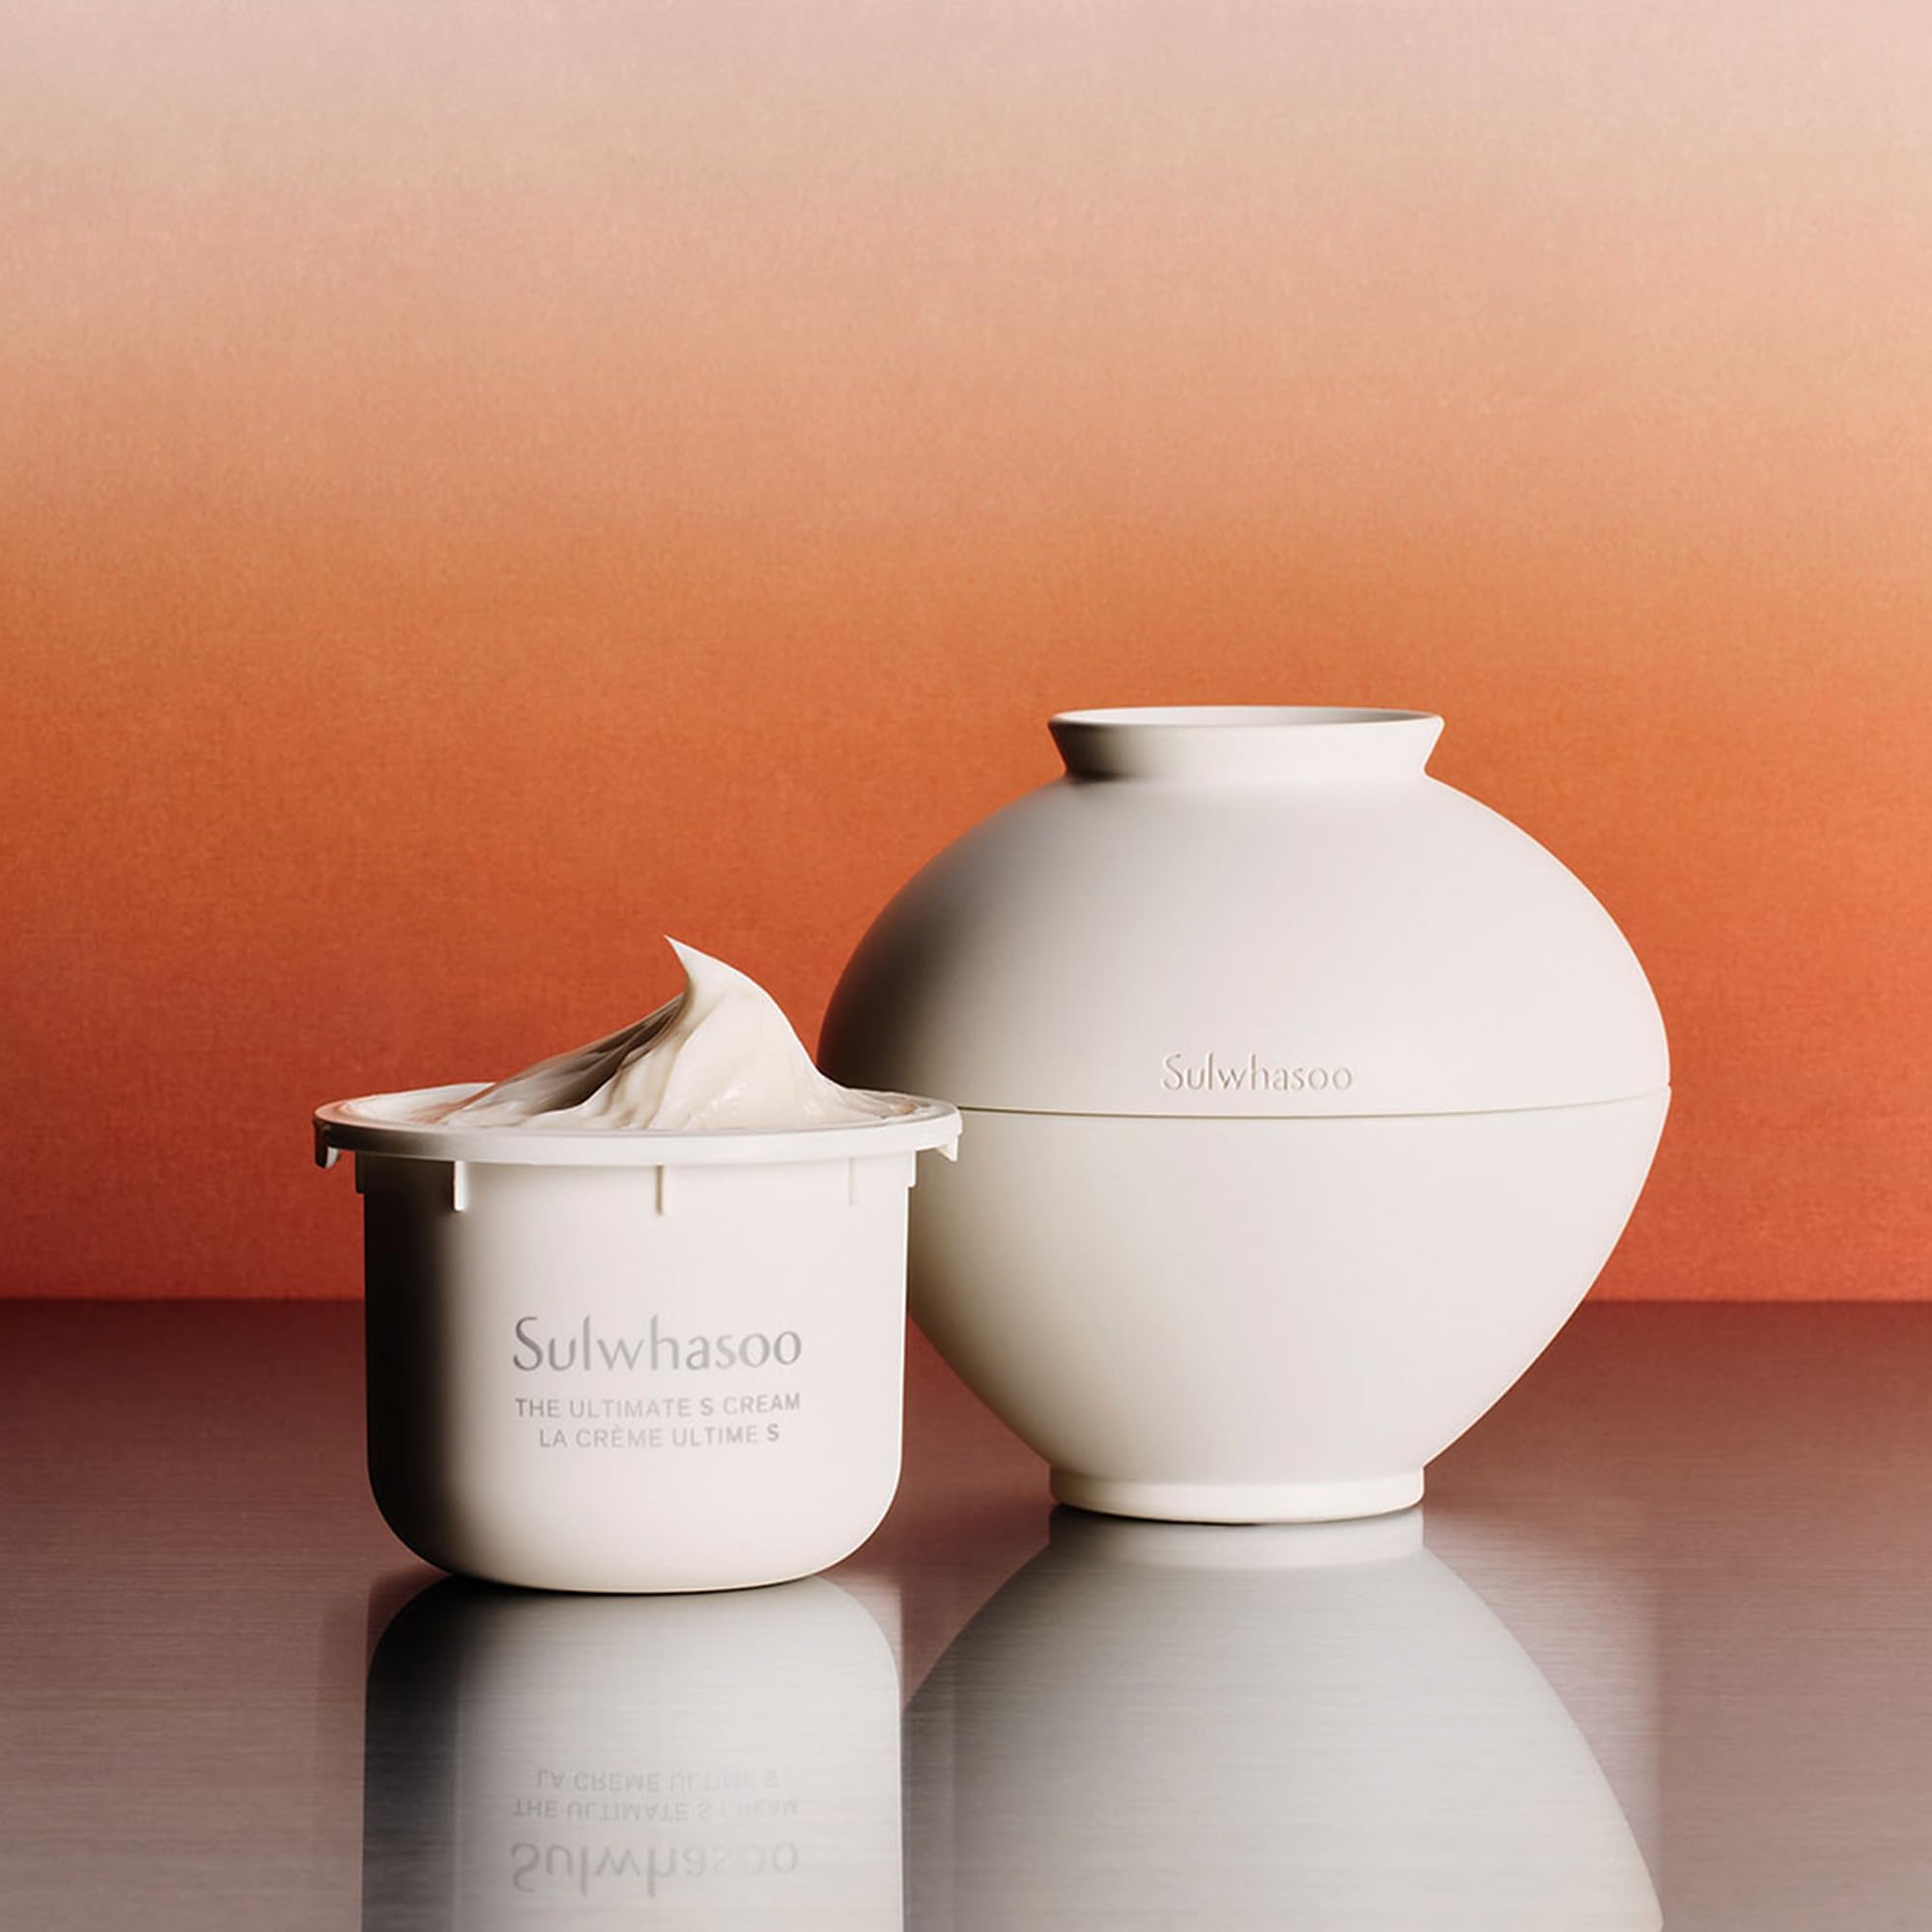 Sulwhasoo Ultimate S Cream: Hydrates, Visibly Firm, Anti-aging, Vitality, Ginseng Berry